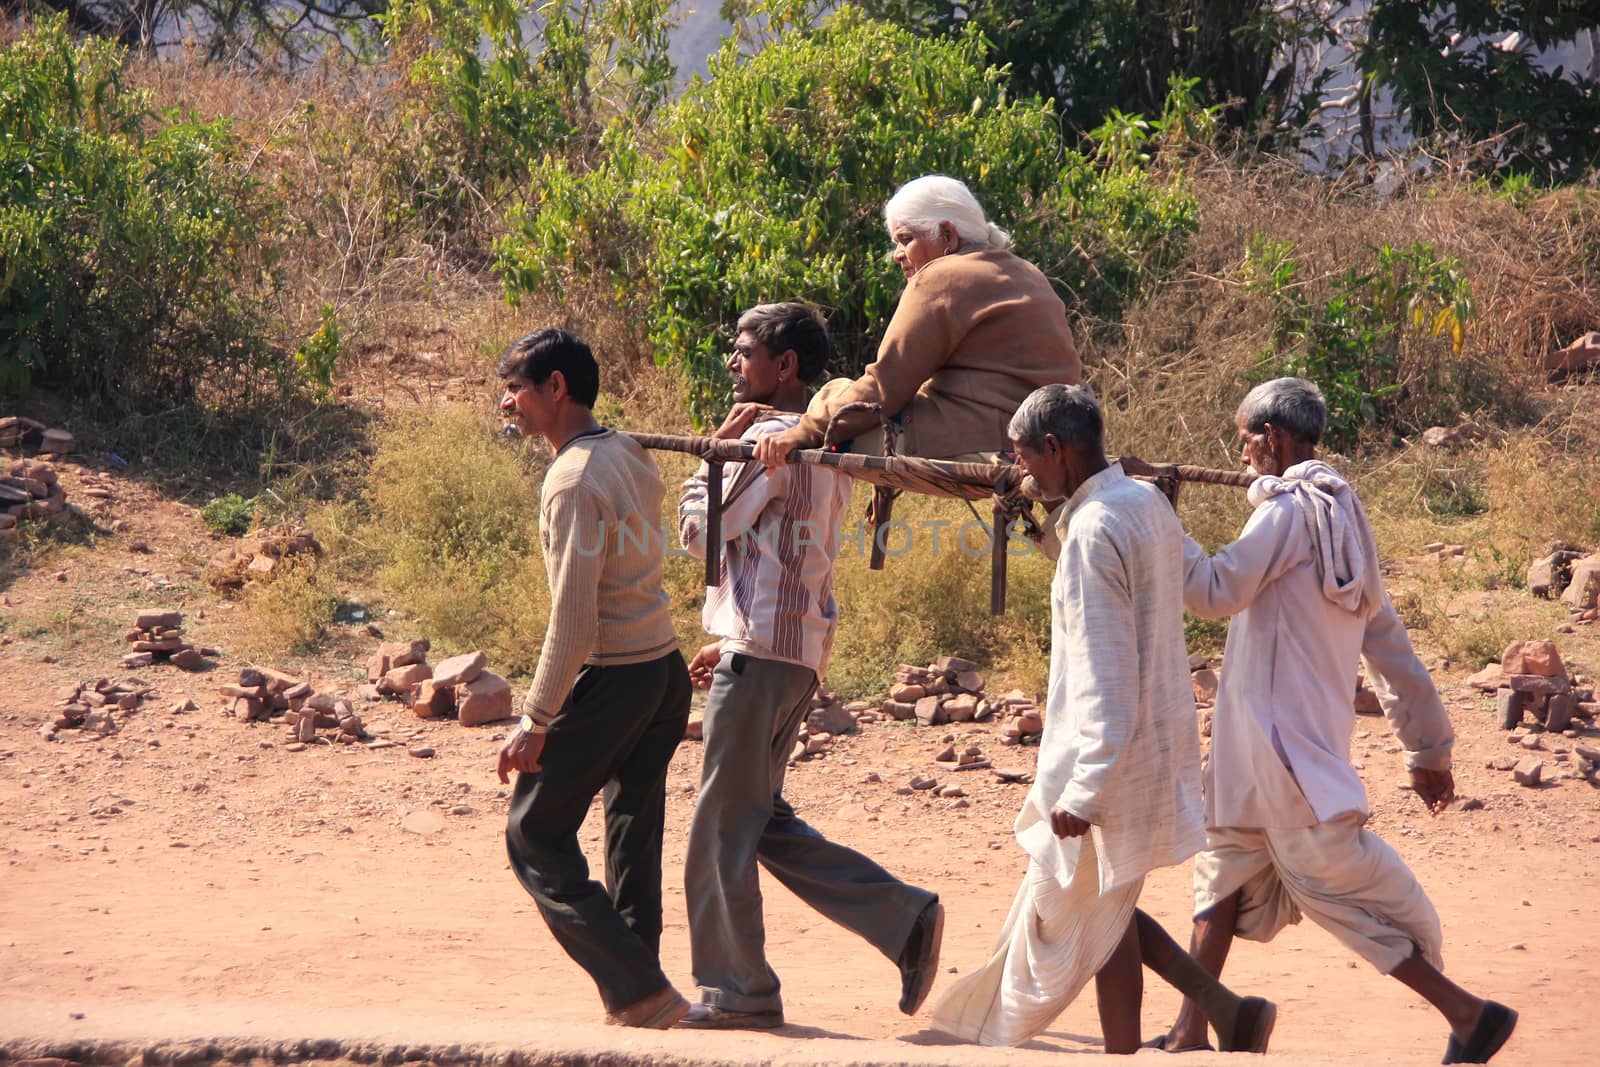 Local men carrying old woman at Ranthambore Fort, Rajasthan, India